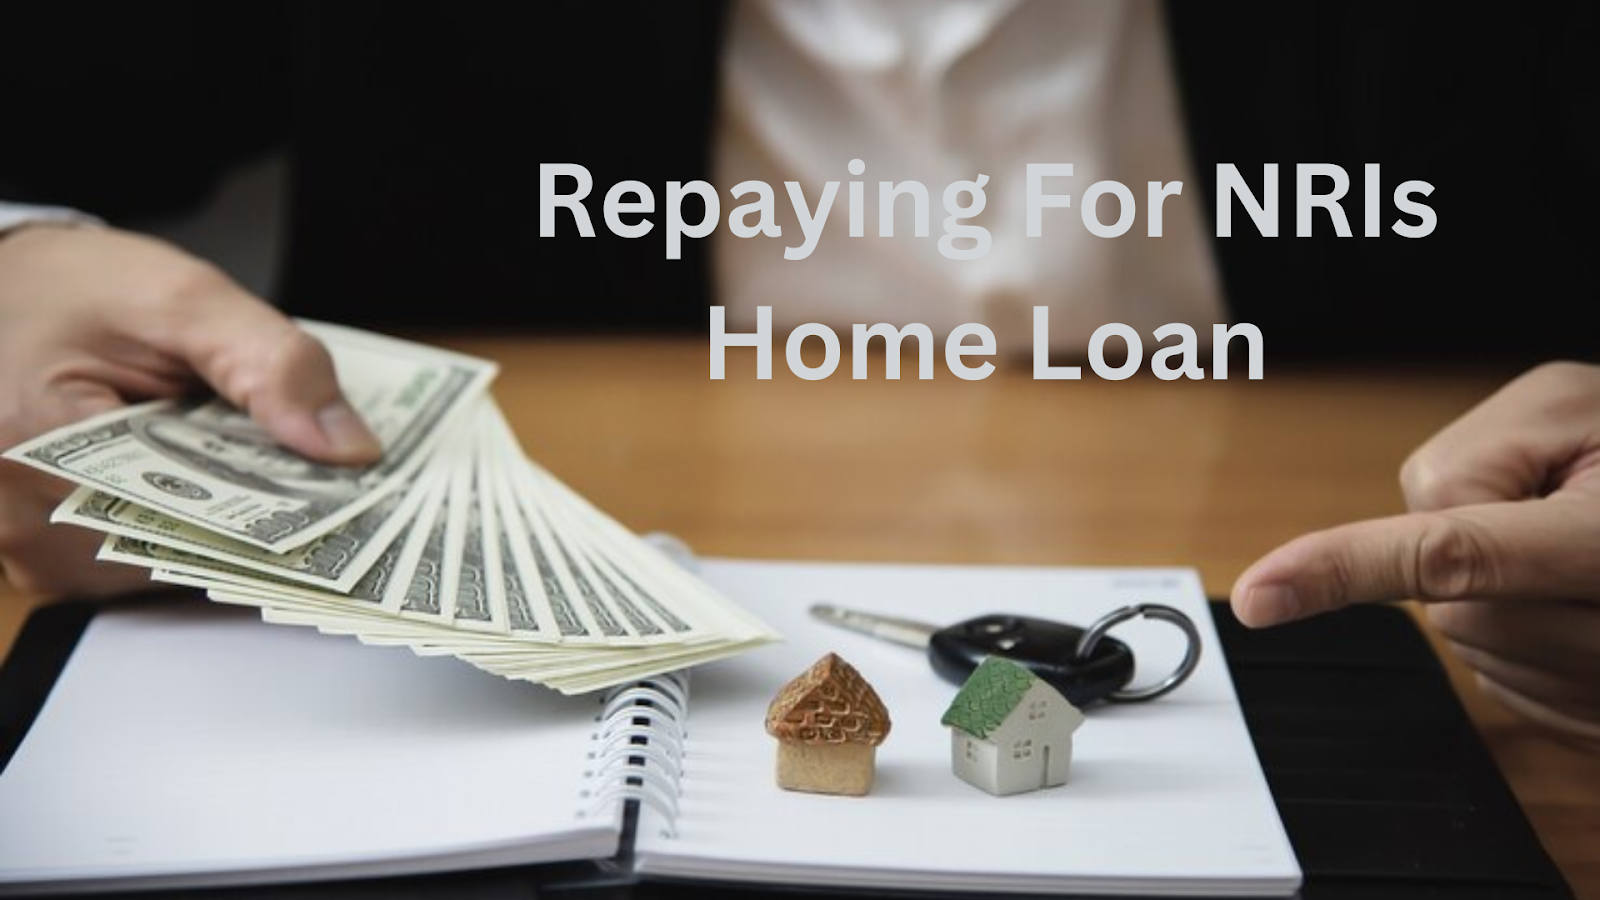 A simple guide to repaying home loans for NRIs.